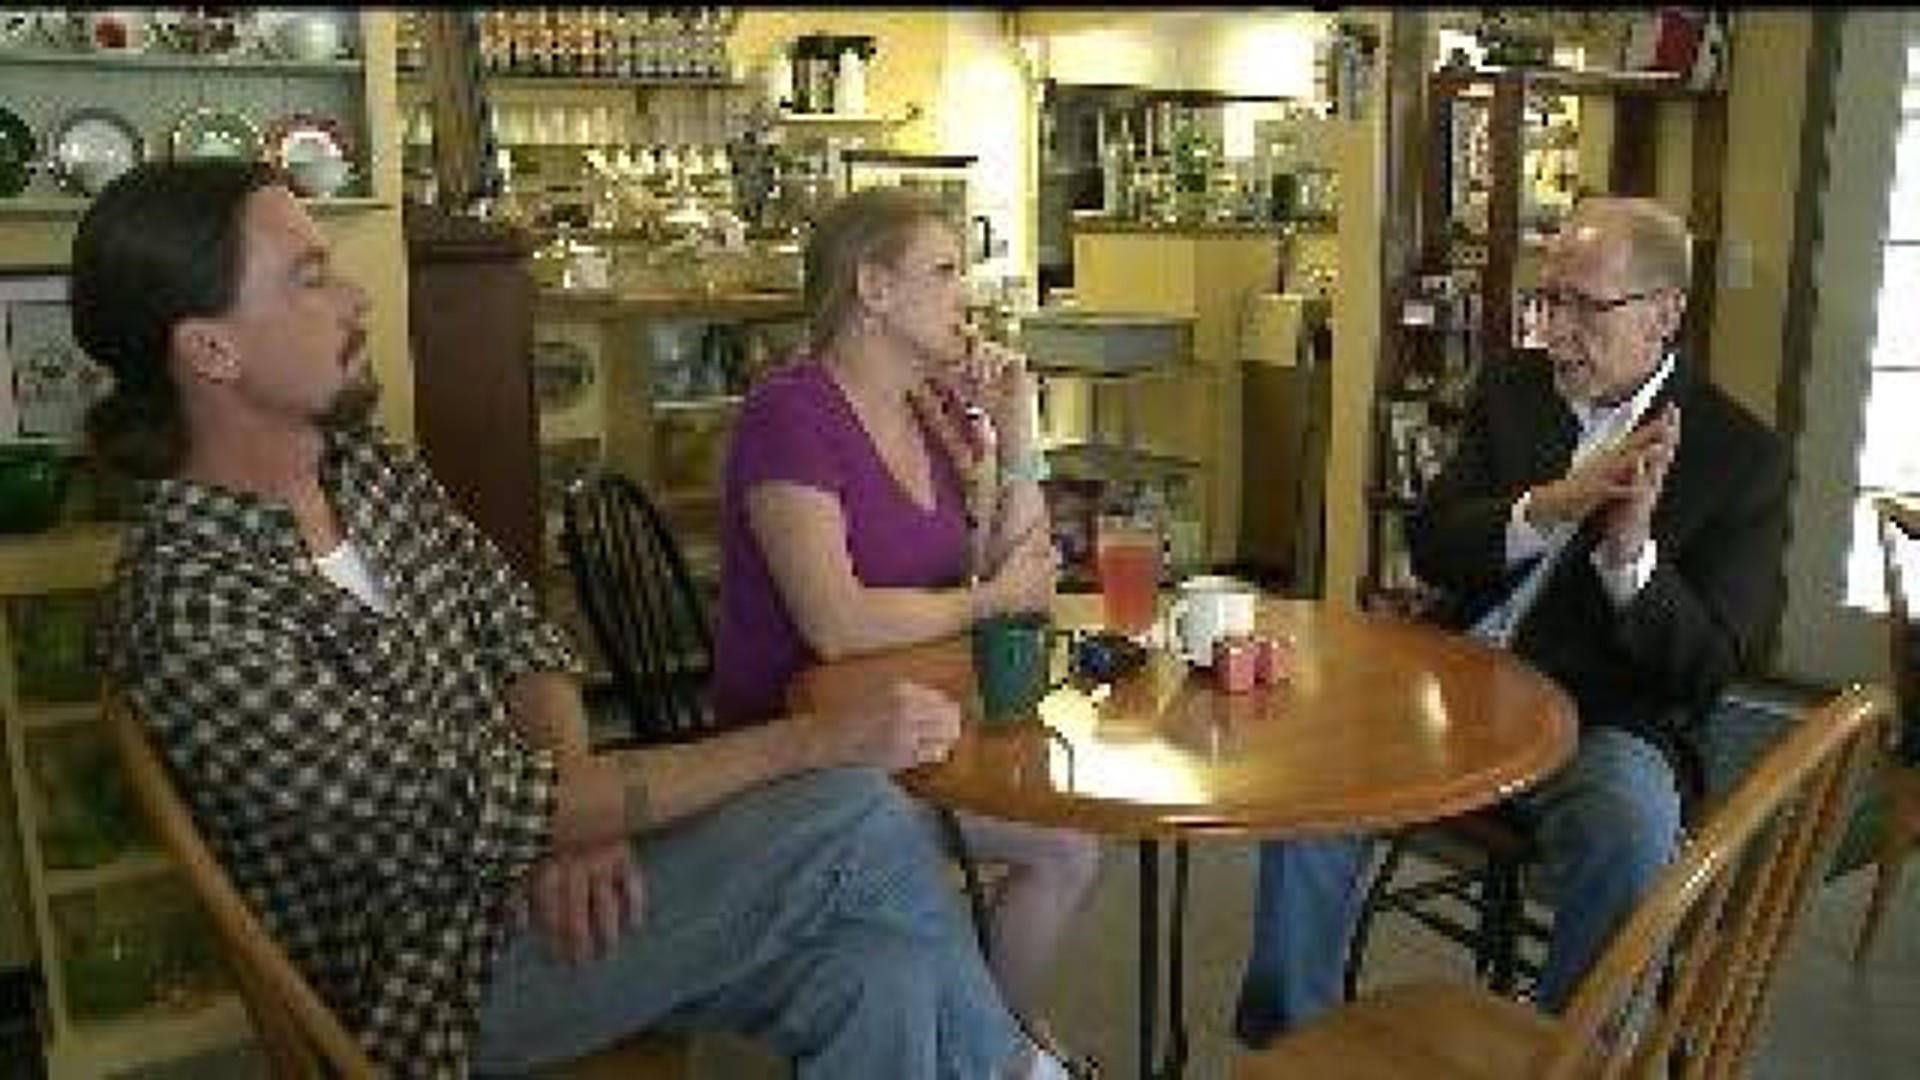 Rep. Loebsack Meets With Small Business Owners on Shutdown